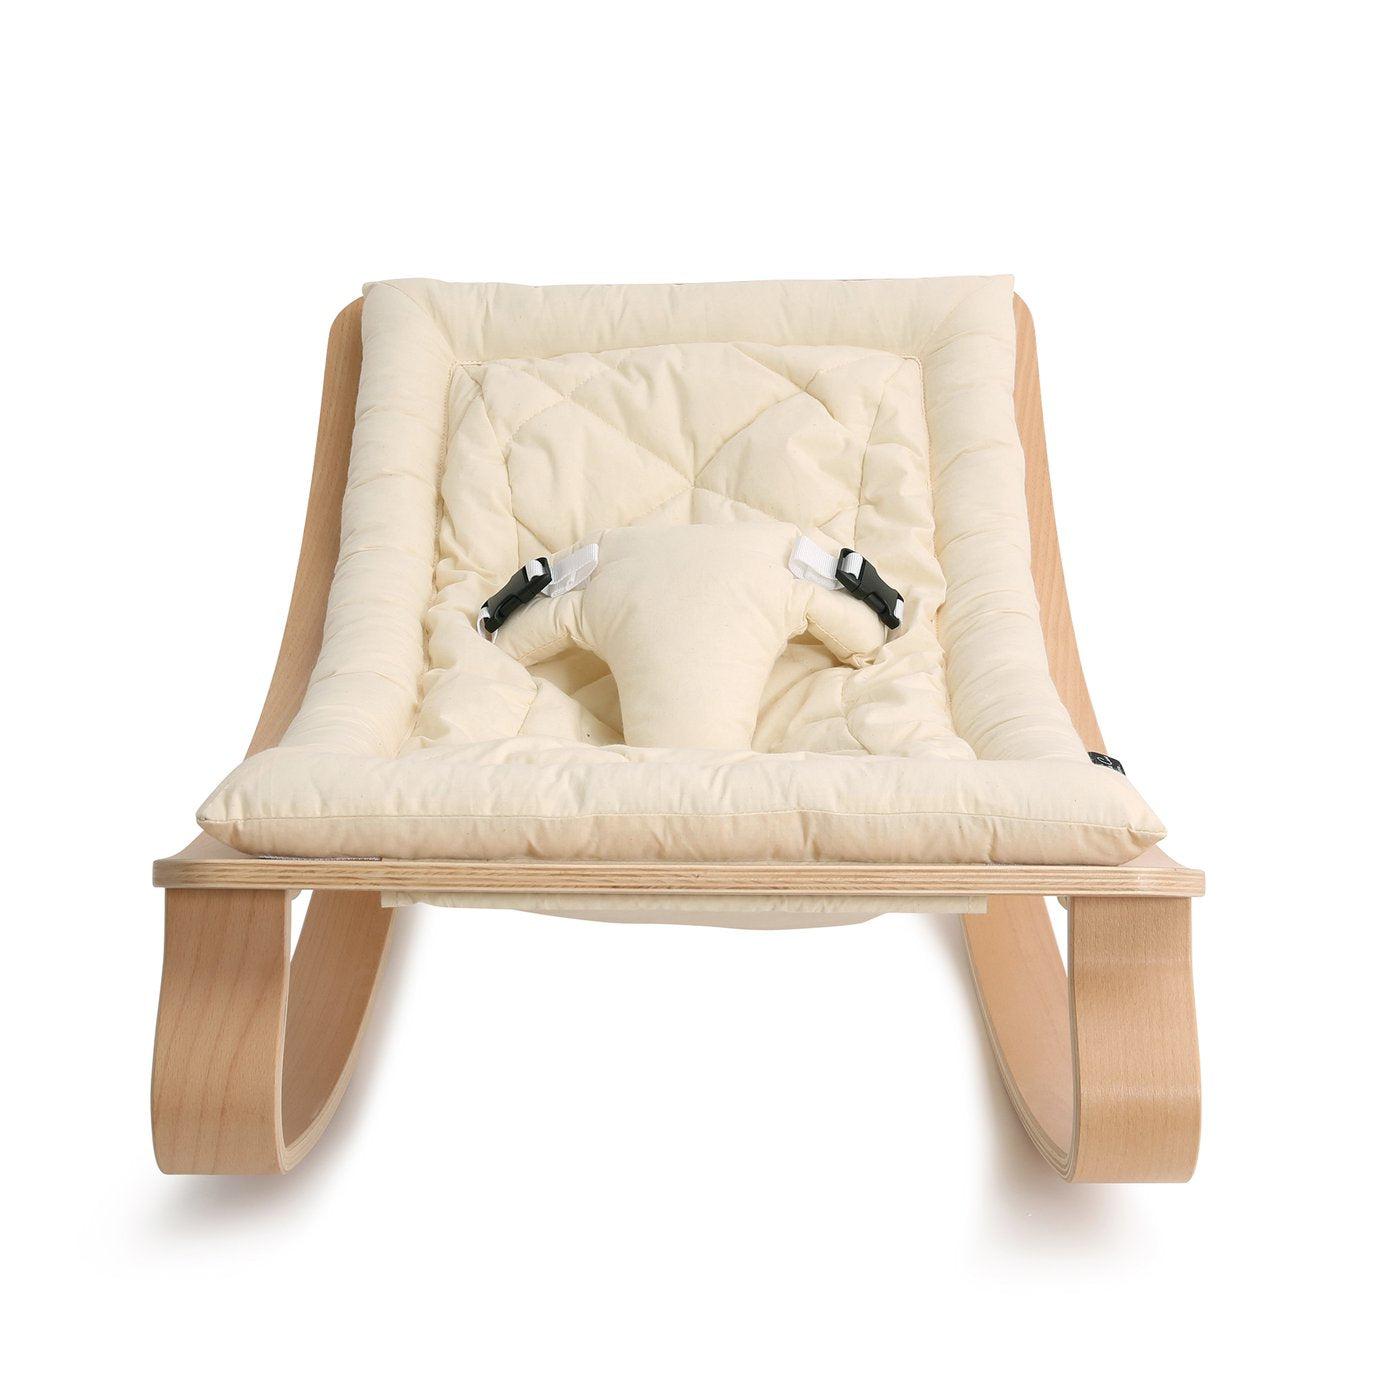 A wooden Levo Rocker by Charlie Crane with a white background.